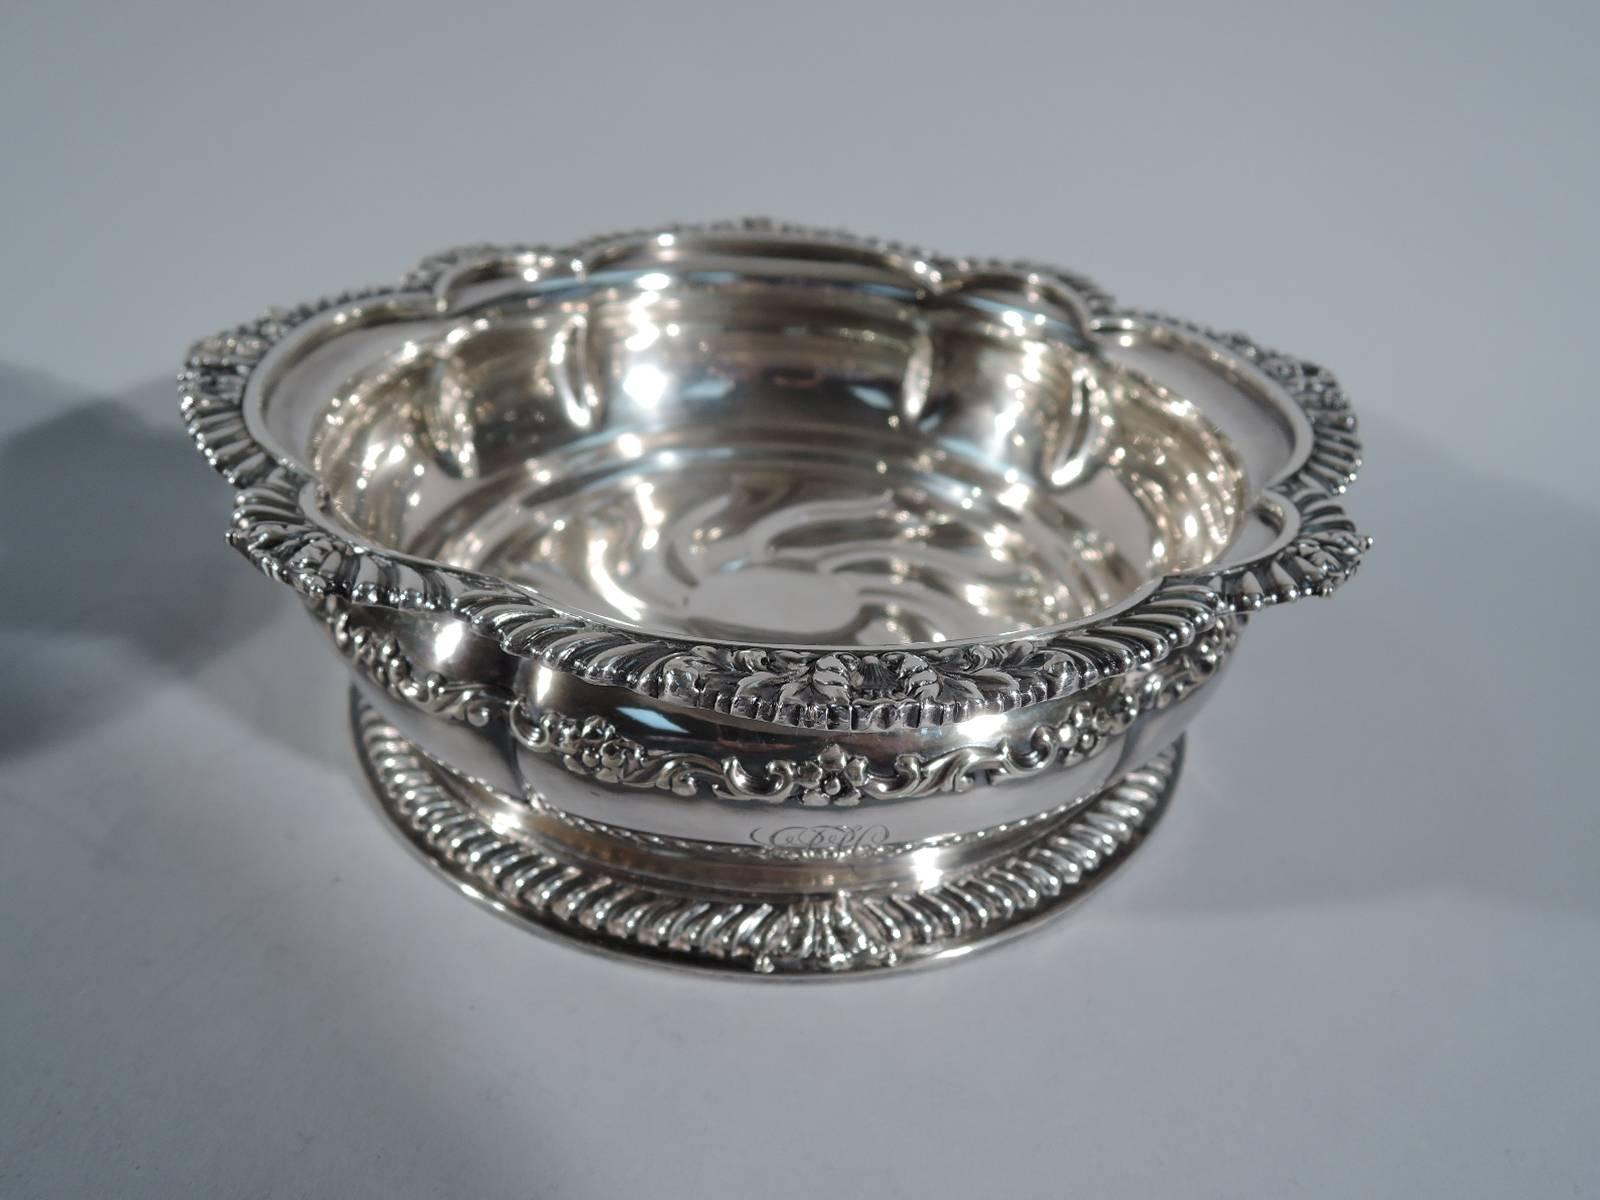 Pair of silver plate wine bottle coasters. Made by Tiffany & Co. in New York, circa 1890. Each: Lobed sides with flat rim comprising alternating large and small scallops. Rim gadrooned and decorated with shells and leaves. Bottom has twisted